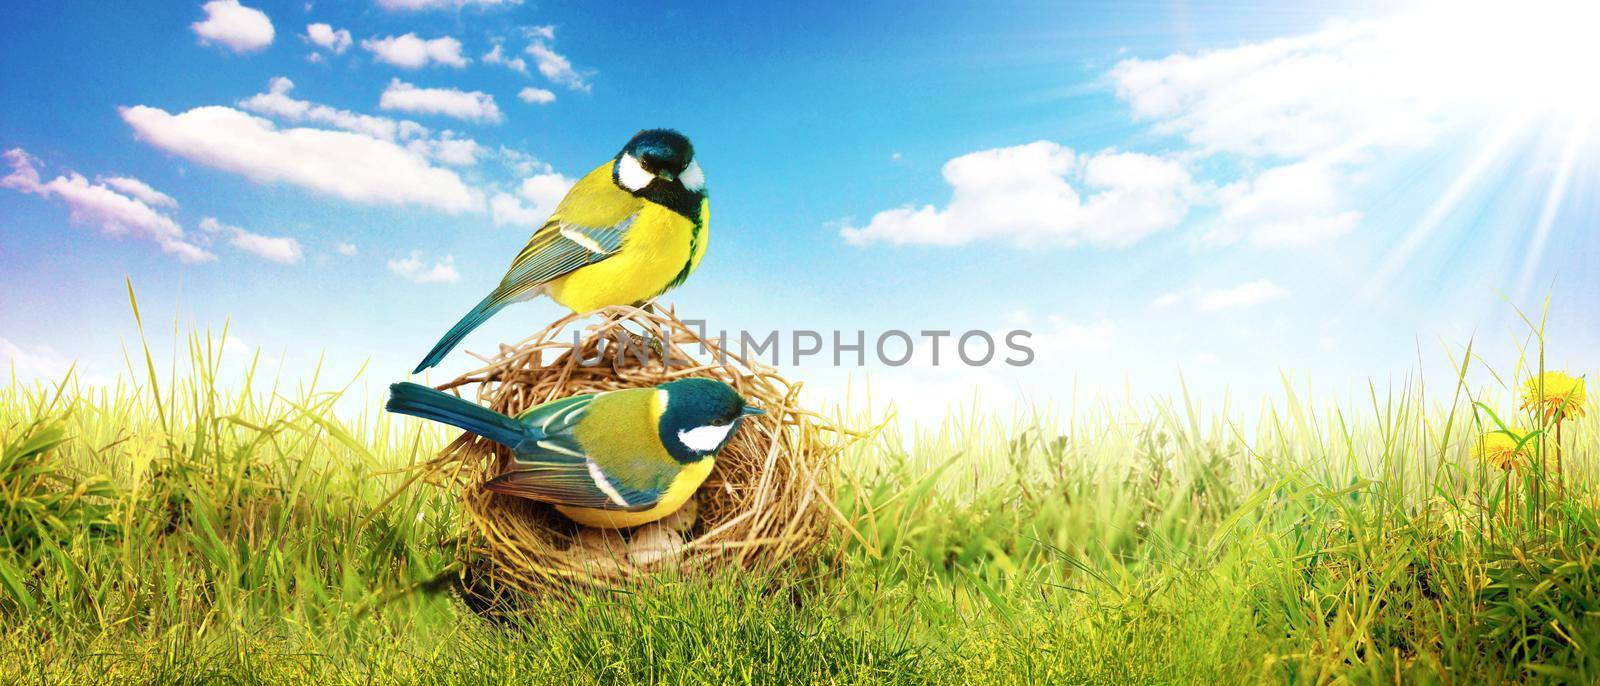 Concept of bird lovers and birdwatching. A beauty of the environment nature. Ornithology.